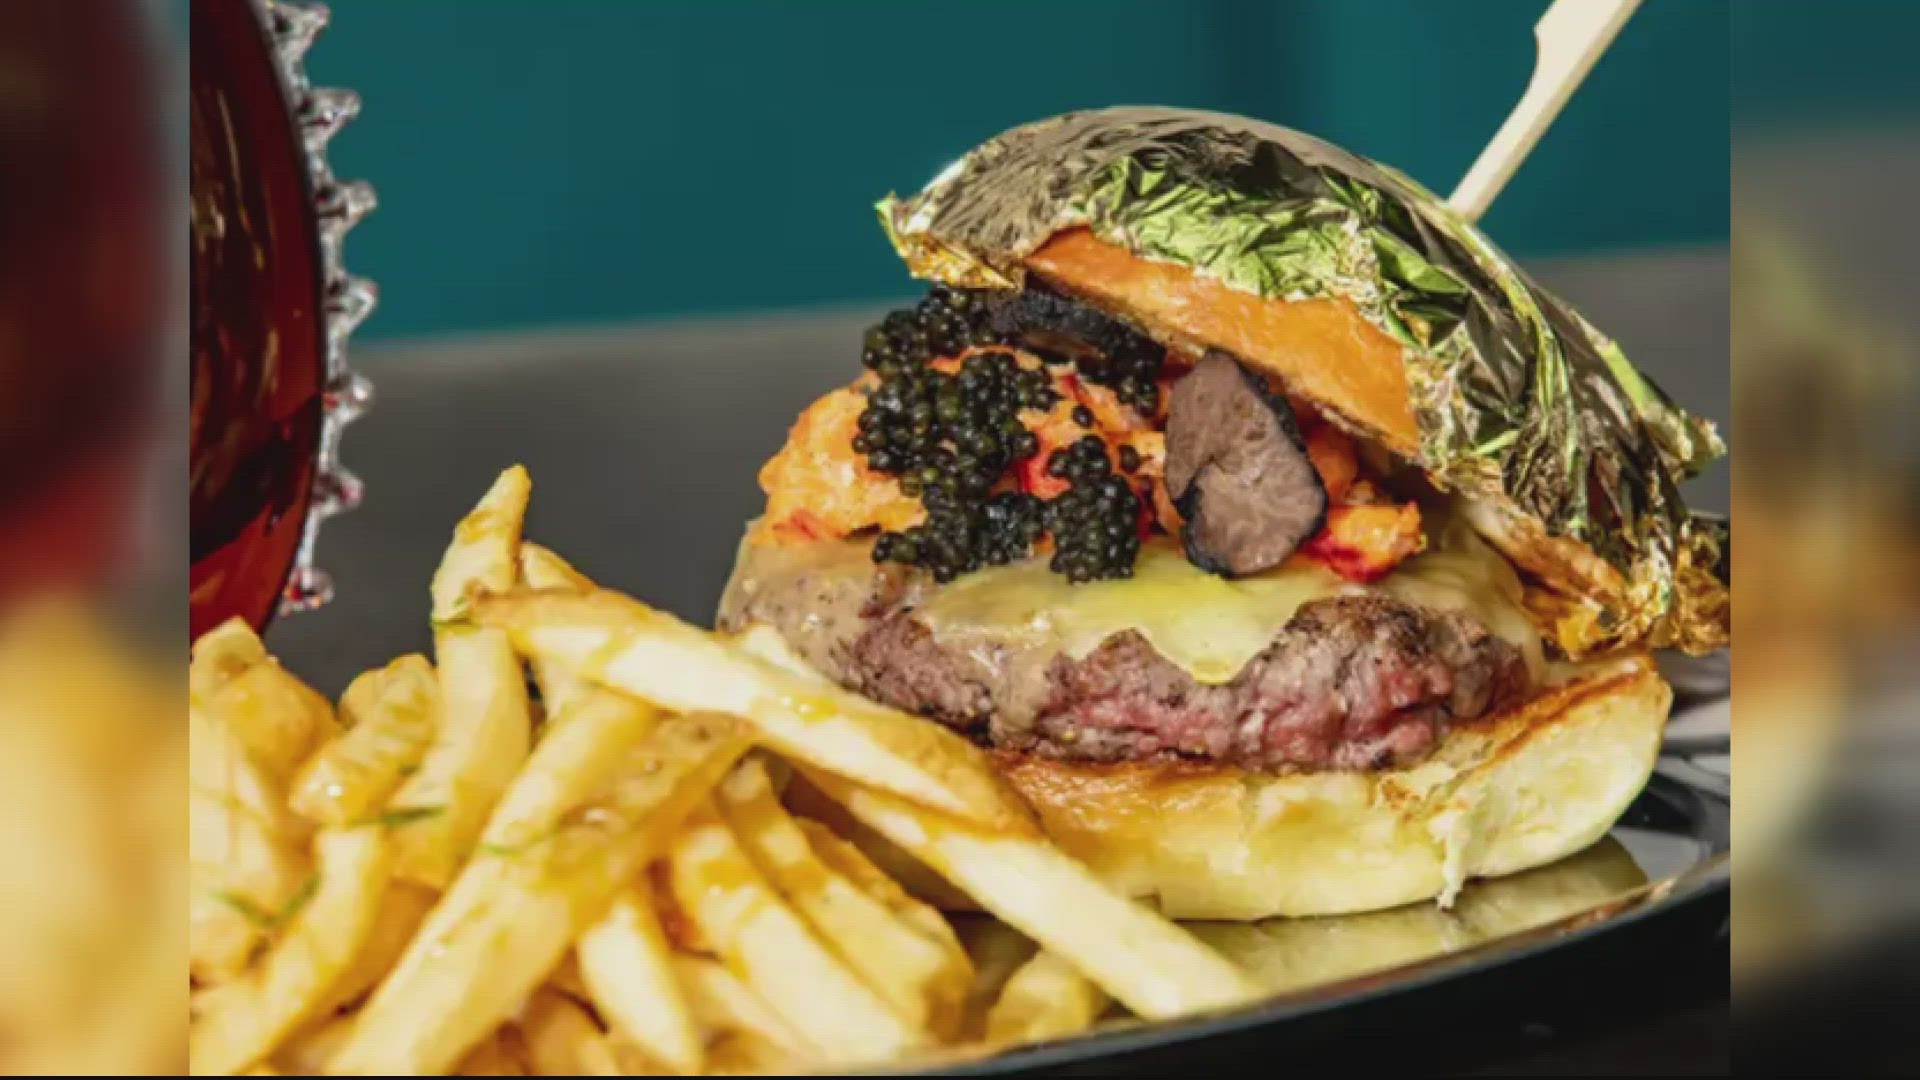 A new restaurant in Philadelphia called "Drury Beer Garden" is asking that much for its 'Gold Standard Burger.'